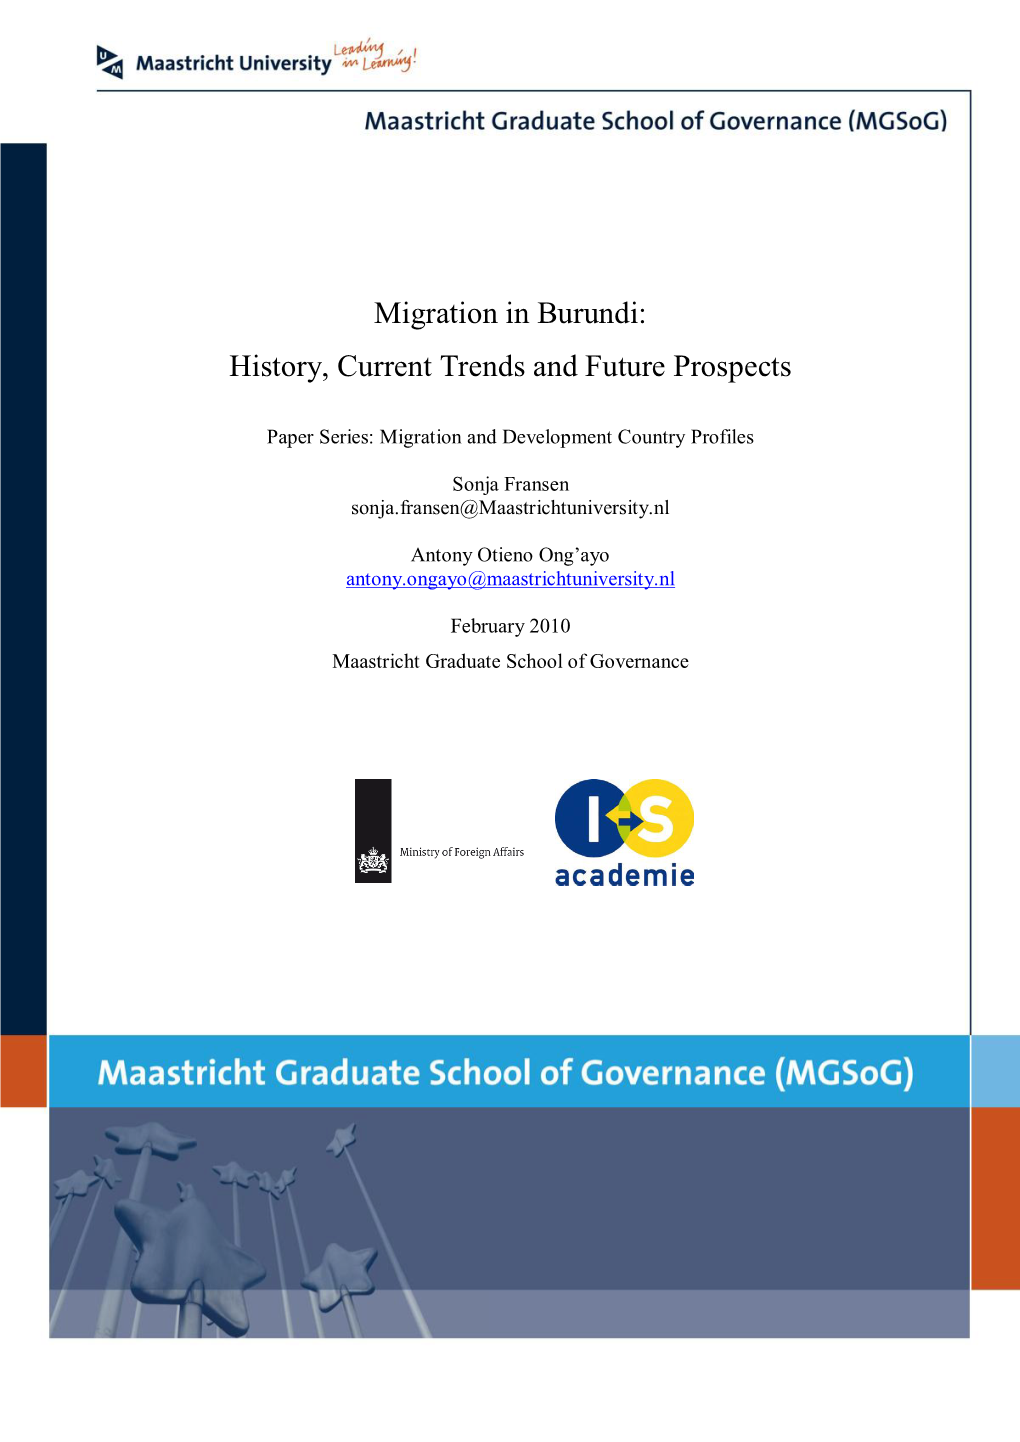 Migration in Burundi: History, Current Trends and Future Prospects